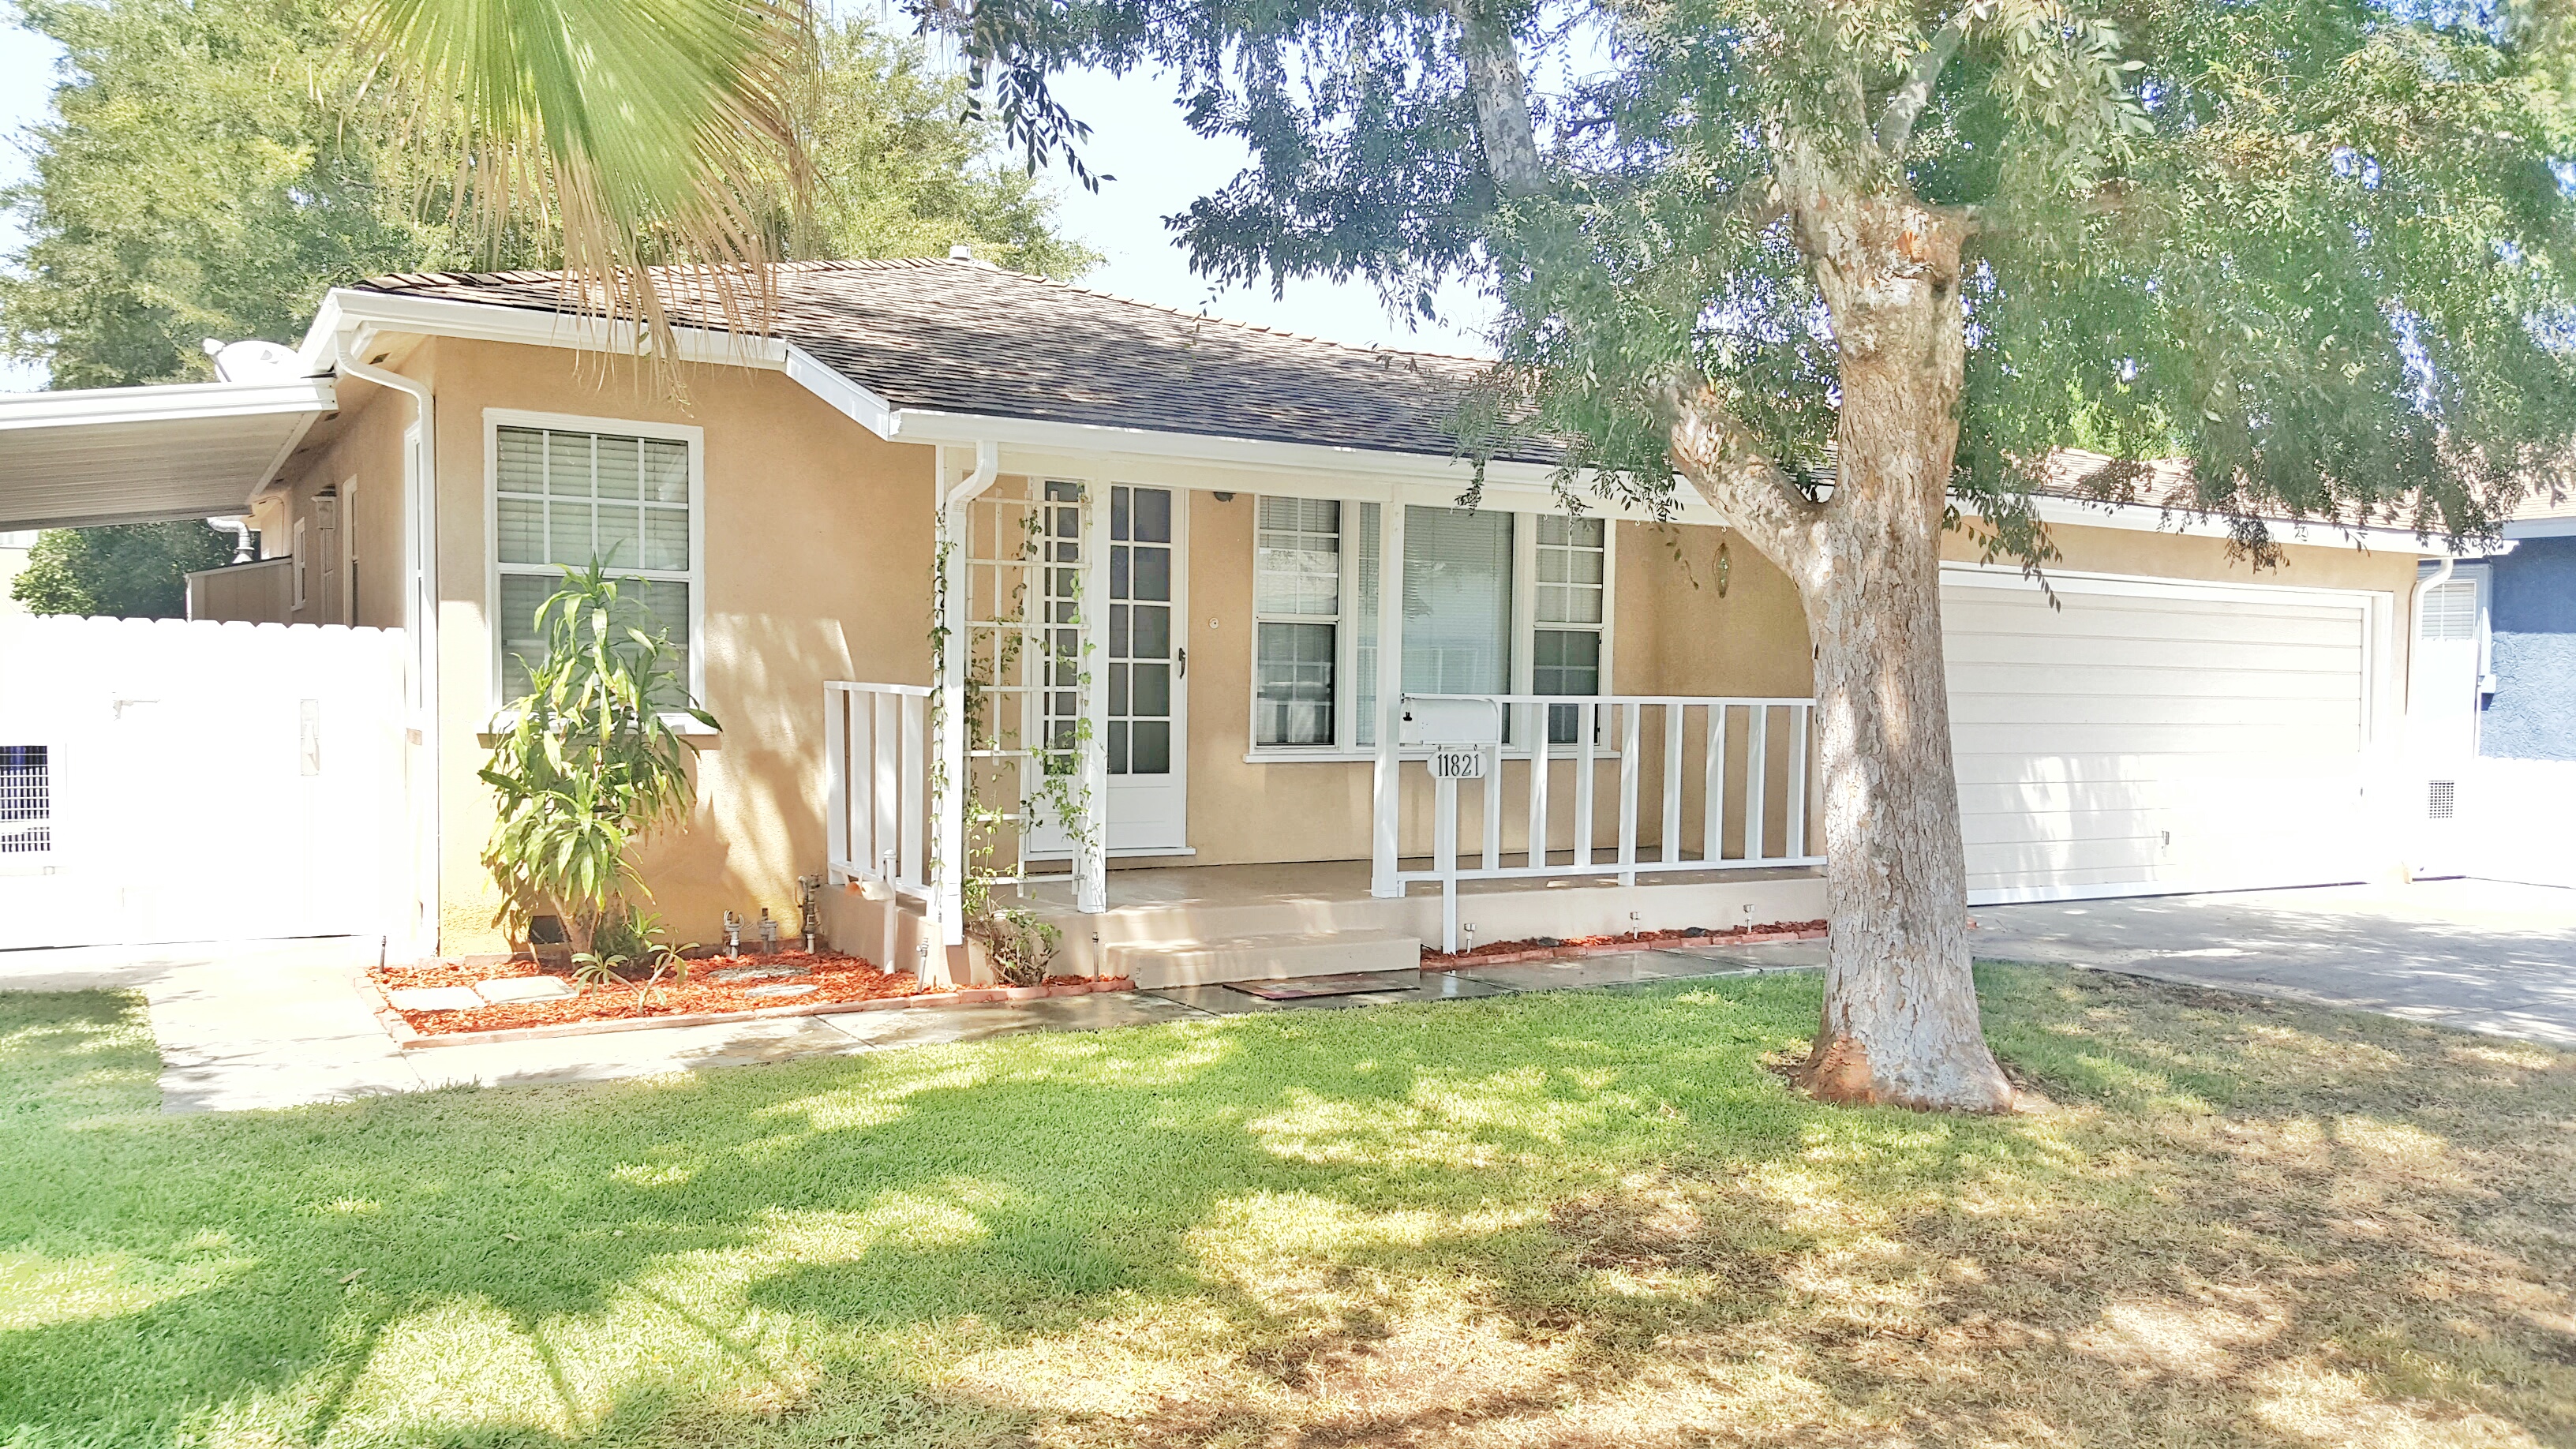 SOLD! 11821 La Reina Ave, Downey CA | 3 BED 1 BATH | CLICK FOR MORE DETAILS